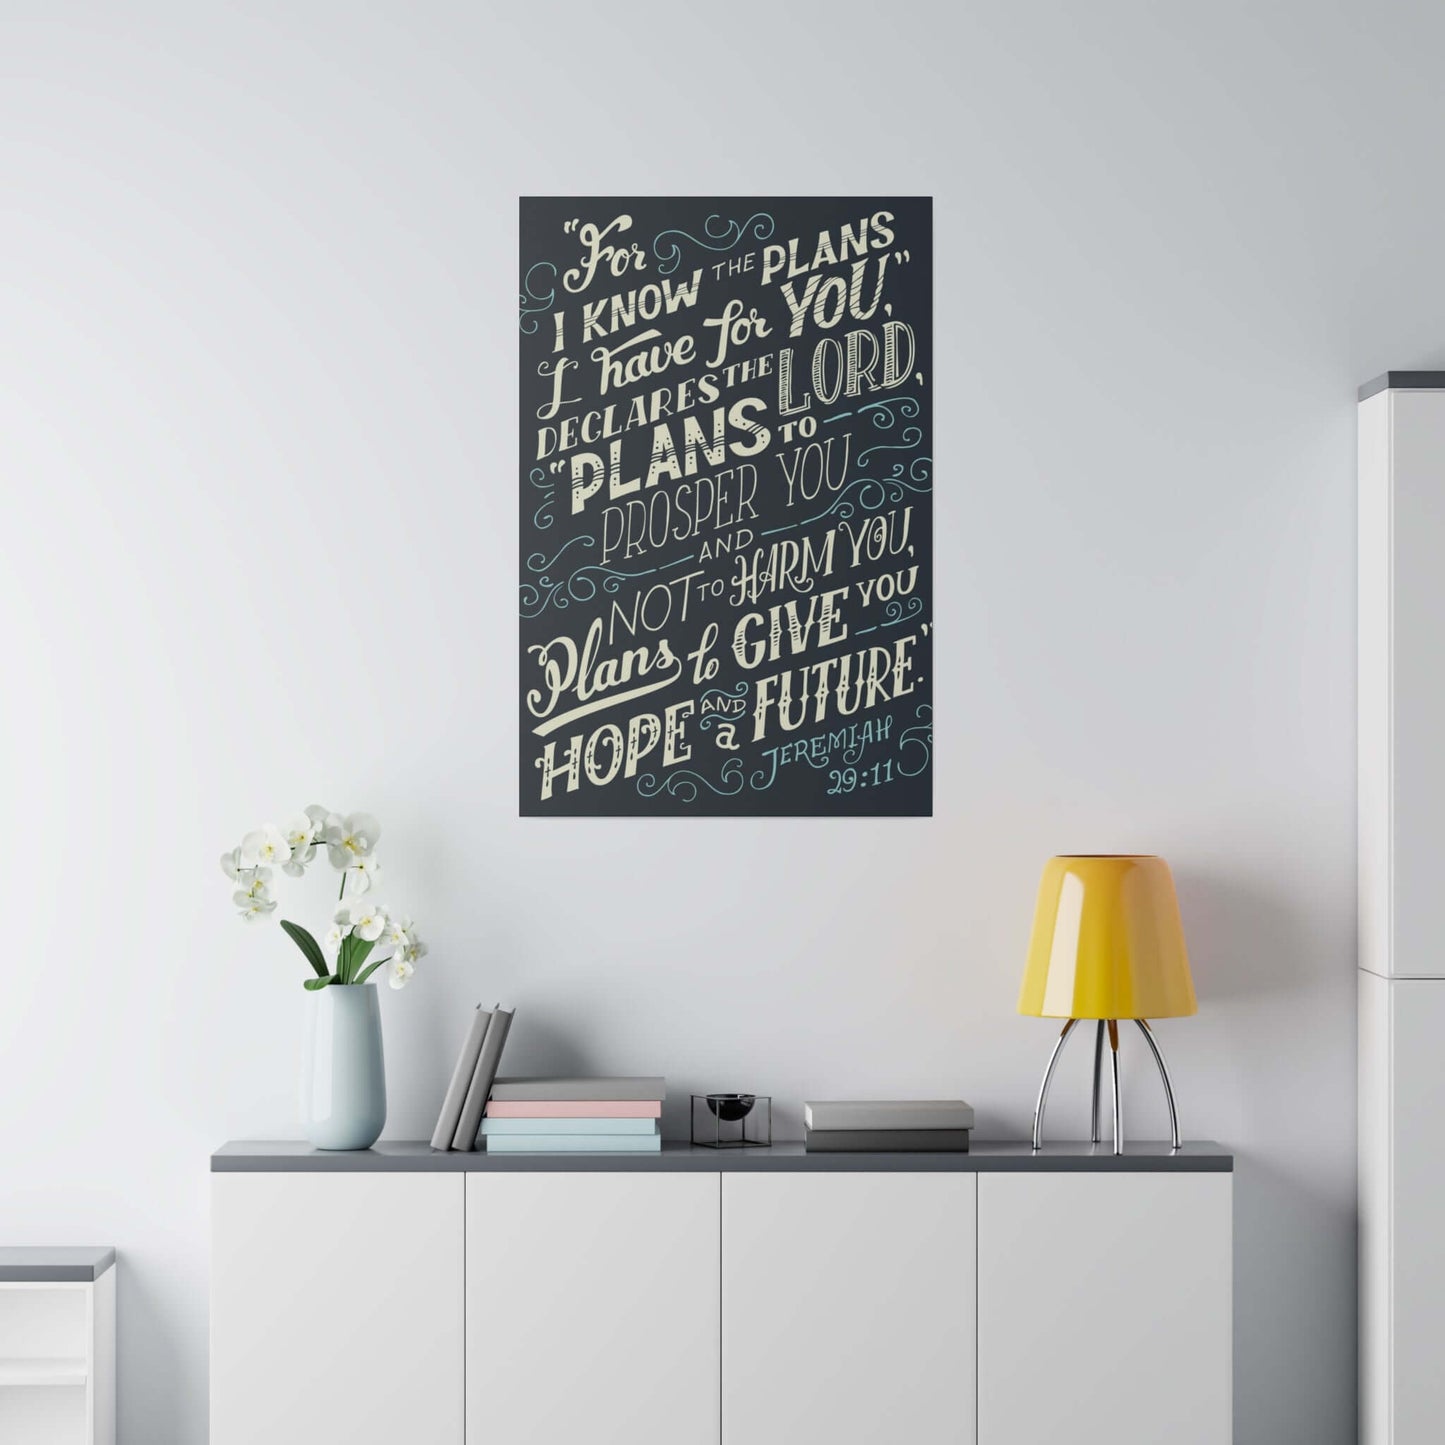 Eco-Friendly Hanging Canvas Prints - Jeremiah 29:11 Verse, Unframed | Art & Wall Decor,Canvas,Decor,Eco-friendly,Hanging Hardware,Holiday Picks,Home & Living,Indoor,Matte,Seasonal Picks,Sustainable,Wall,Wood